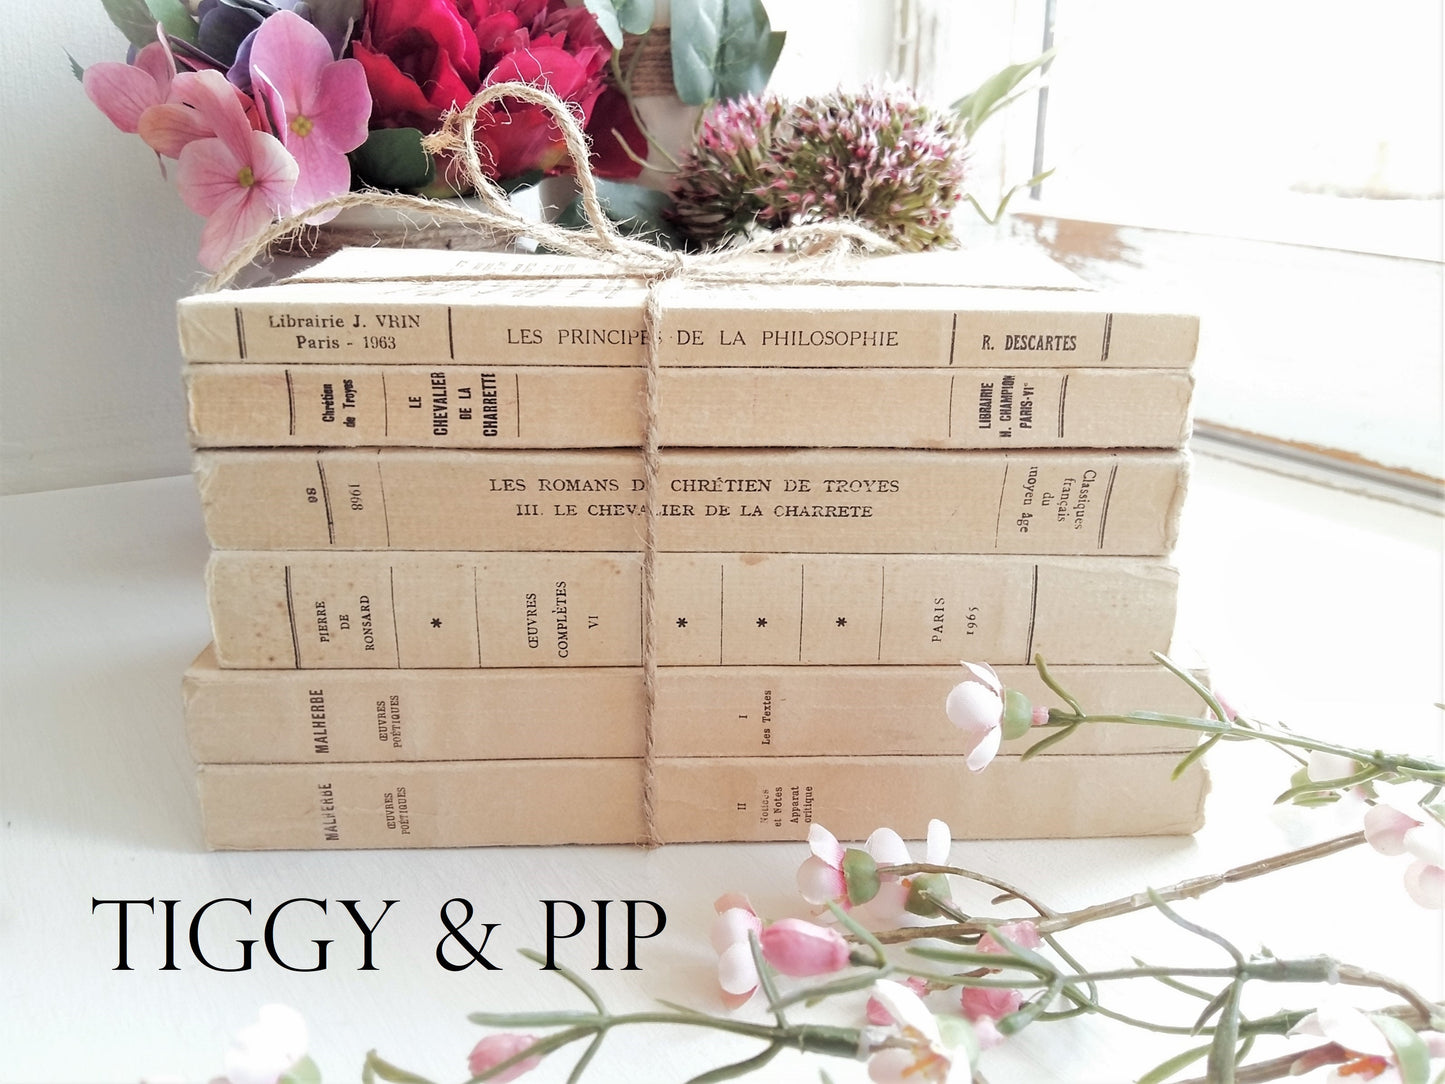 Books by Descartes and Malherbe from Tiggy & Pip - €144.00! Shop now at Tiggy and Pip